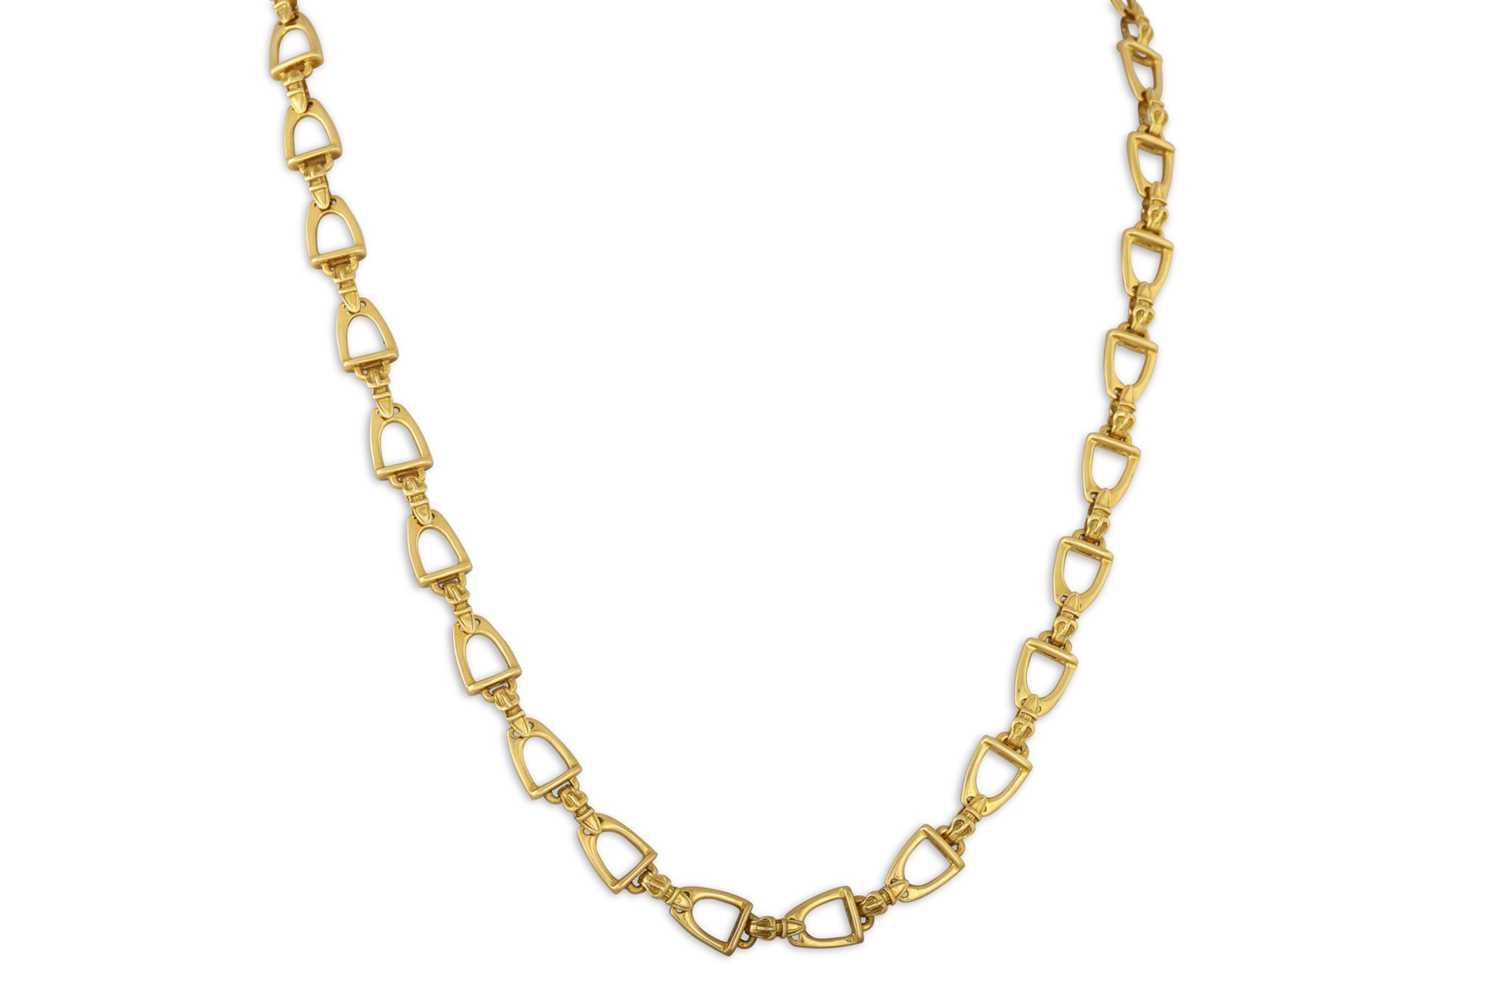 18ct Gold Chain Necklace - 64cm, 11.6g - Necklace/Chain - Jewellery